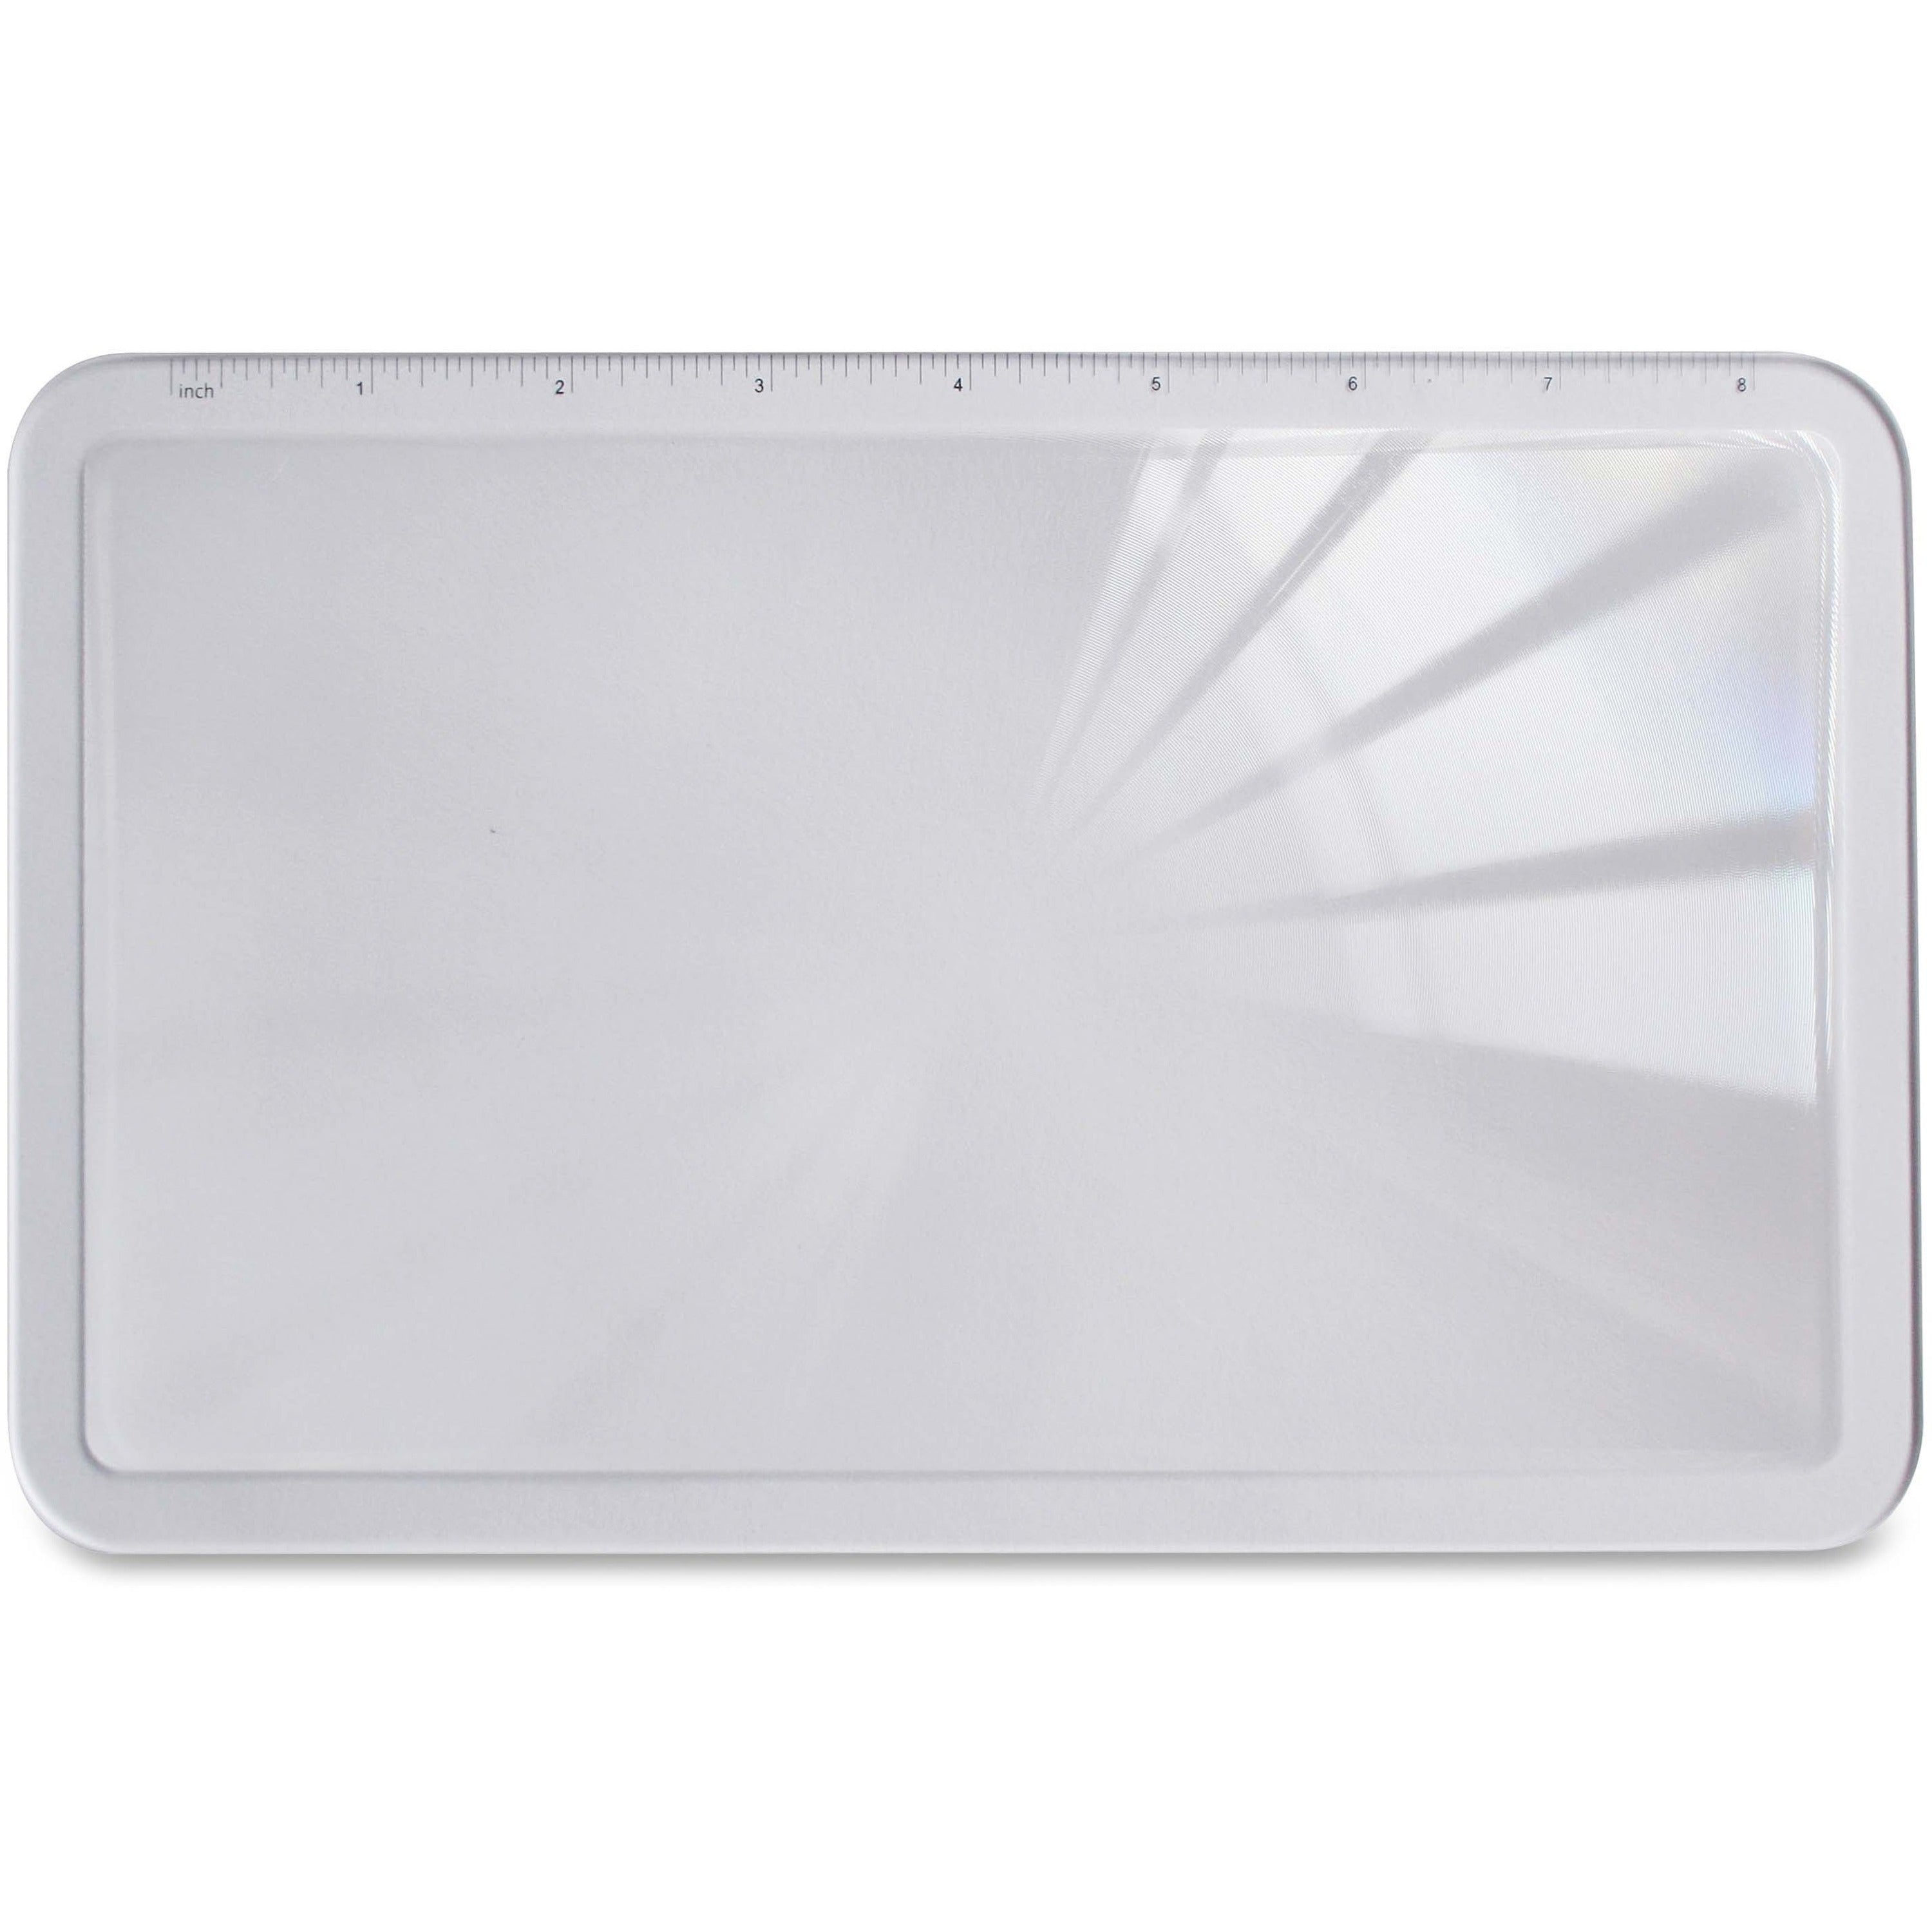 Sparco Handheld Magnifier - Magnifying Area 5" Width x 8.88" Length - Overall Size 9.8" Height x 5.8" Width - Acrylic Lens - 